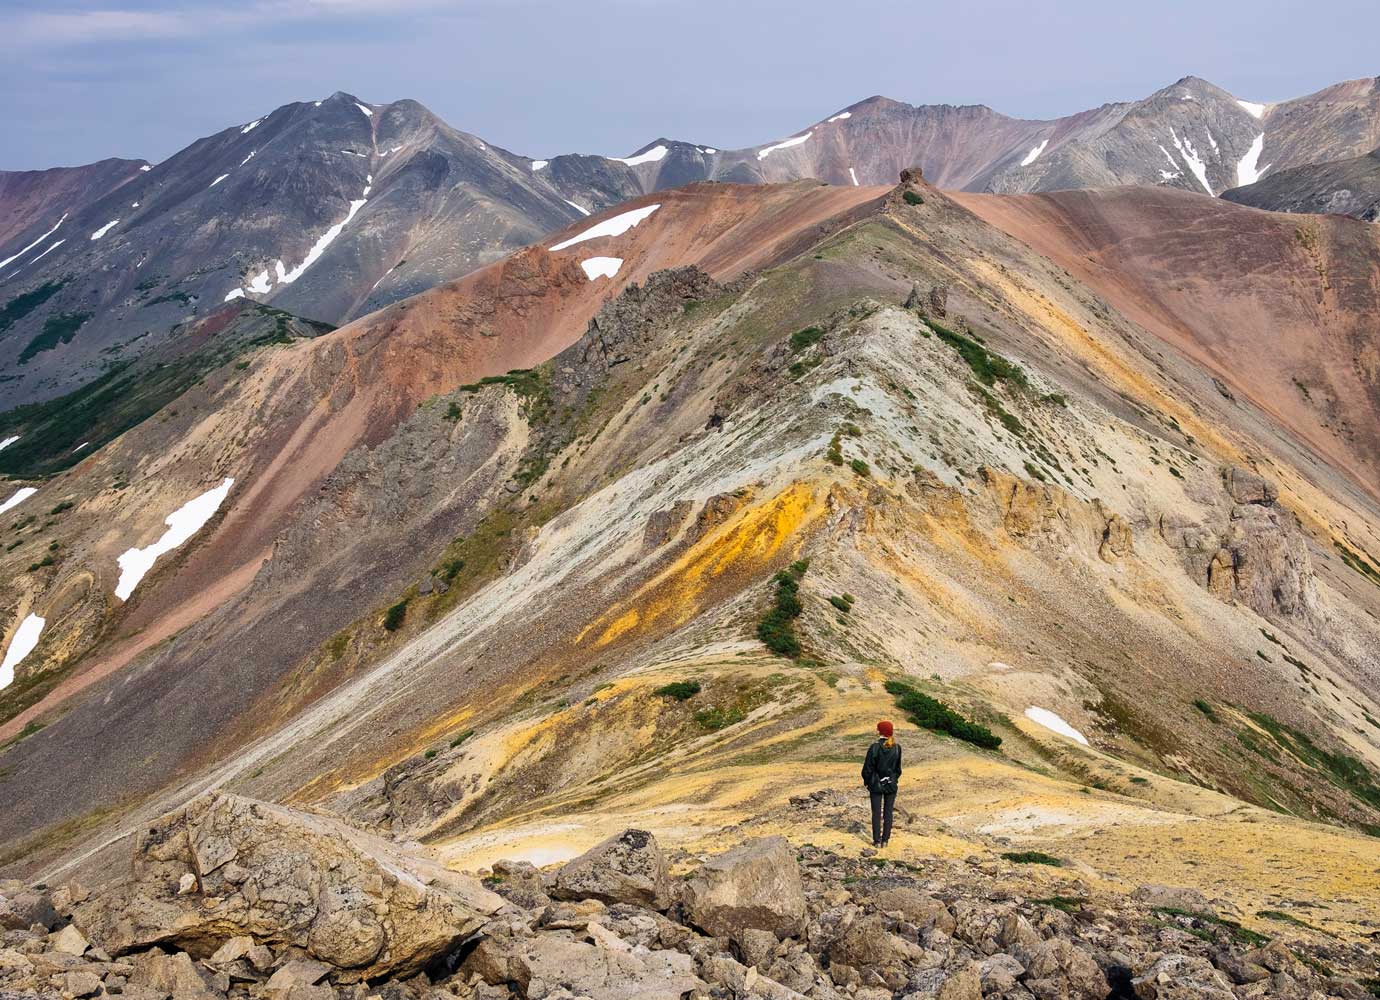 Where the road ends: one man’s quest to capture the magnetism of Magadan’s mountainscapes